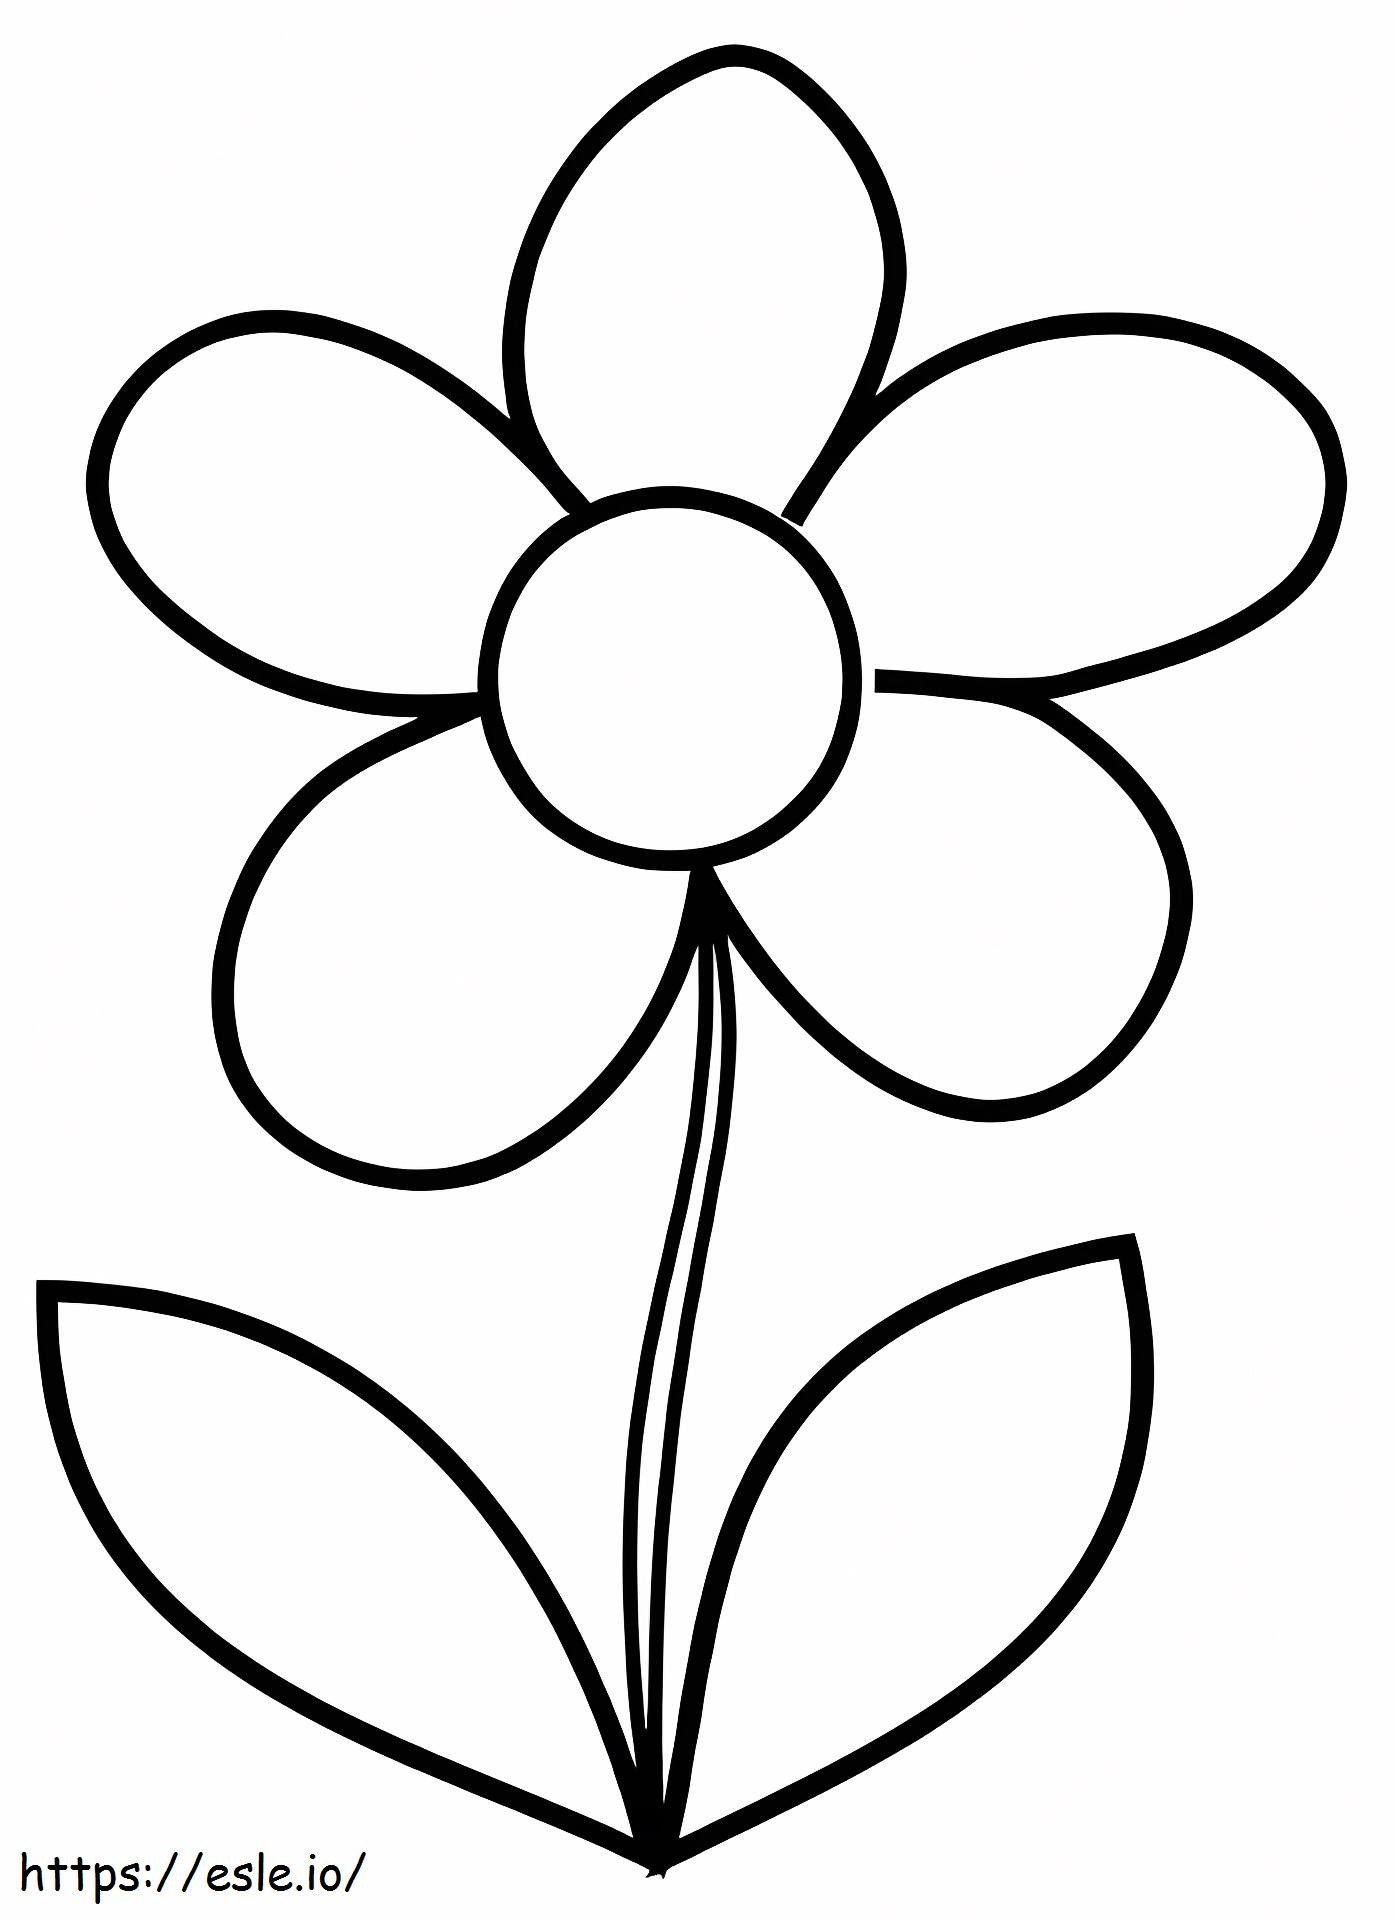 A Simple Flower coloring page